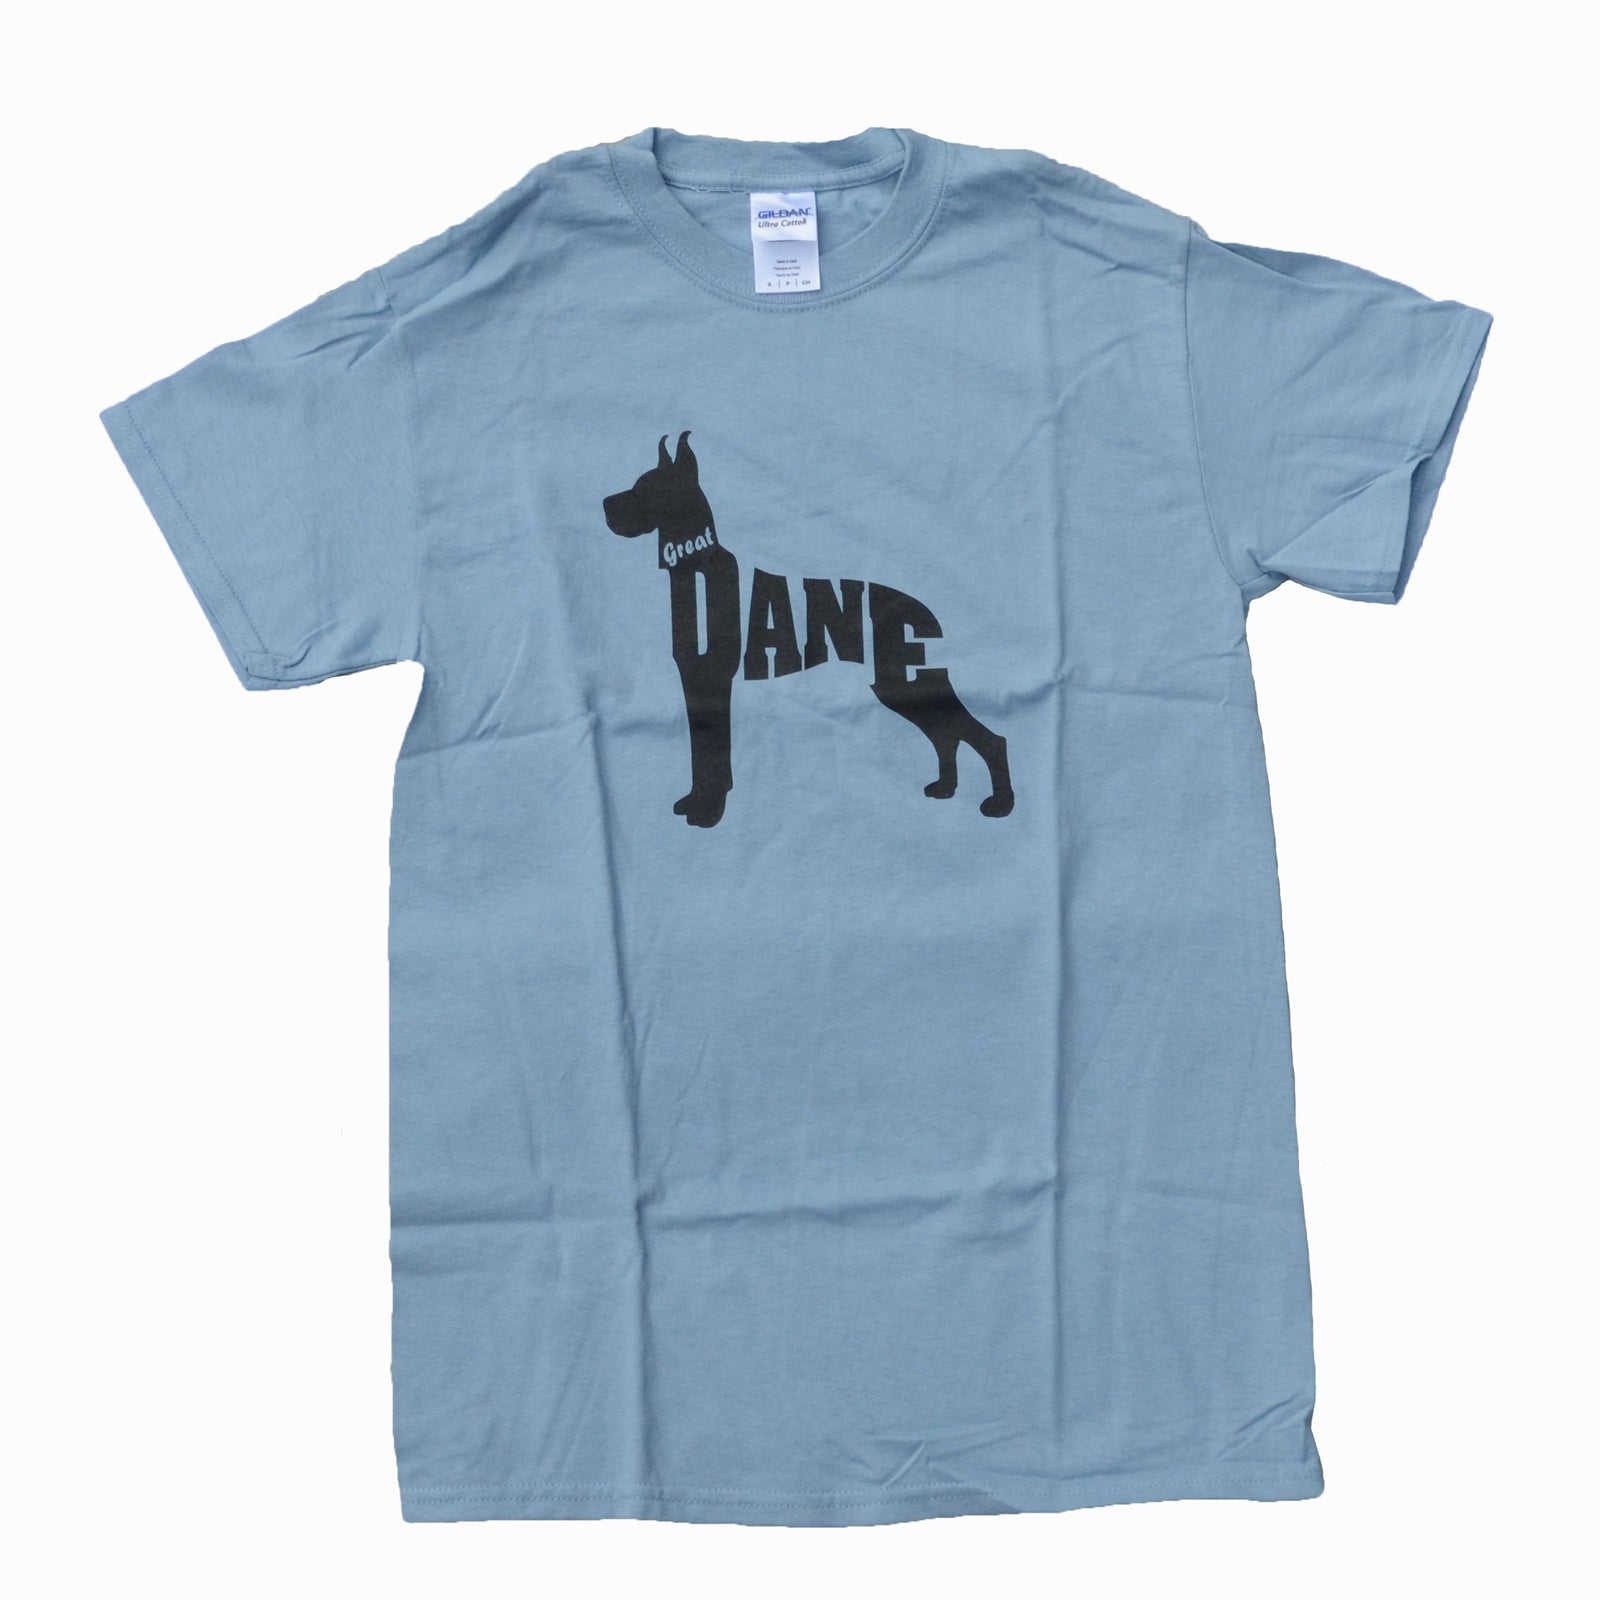 "Great Dane T-Shirt" - limited supply